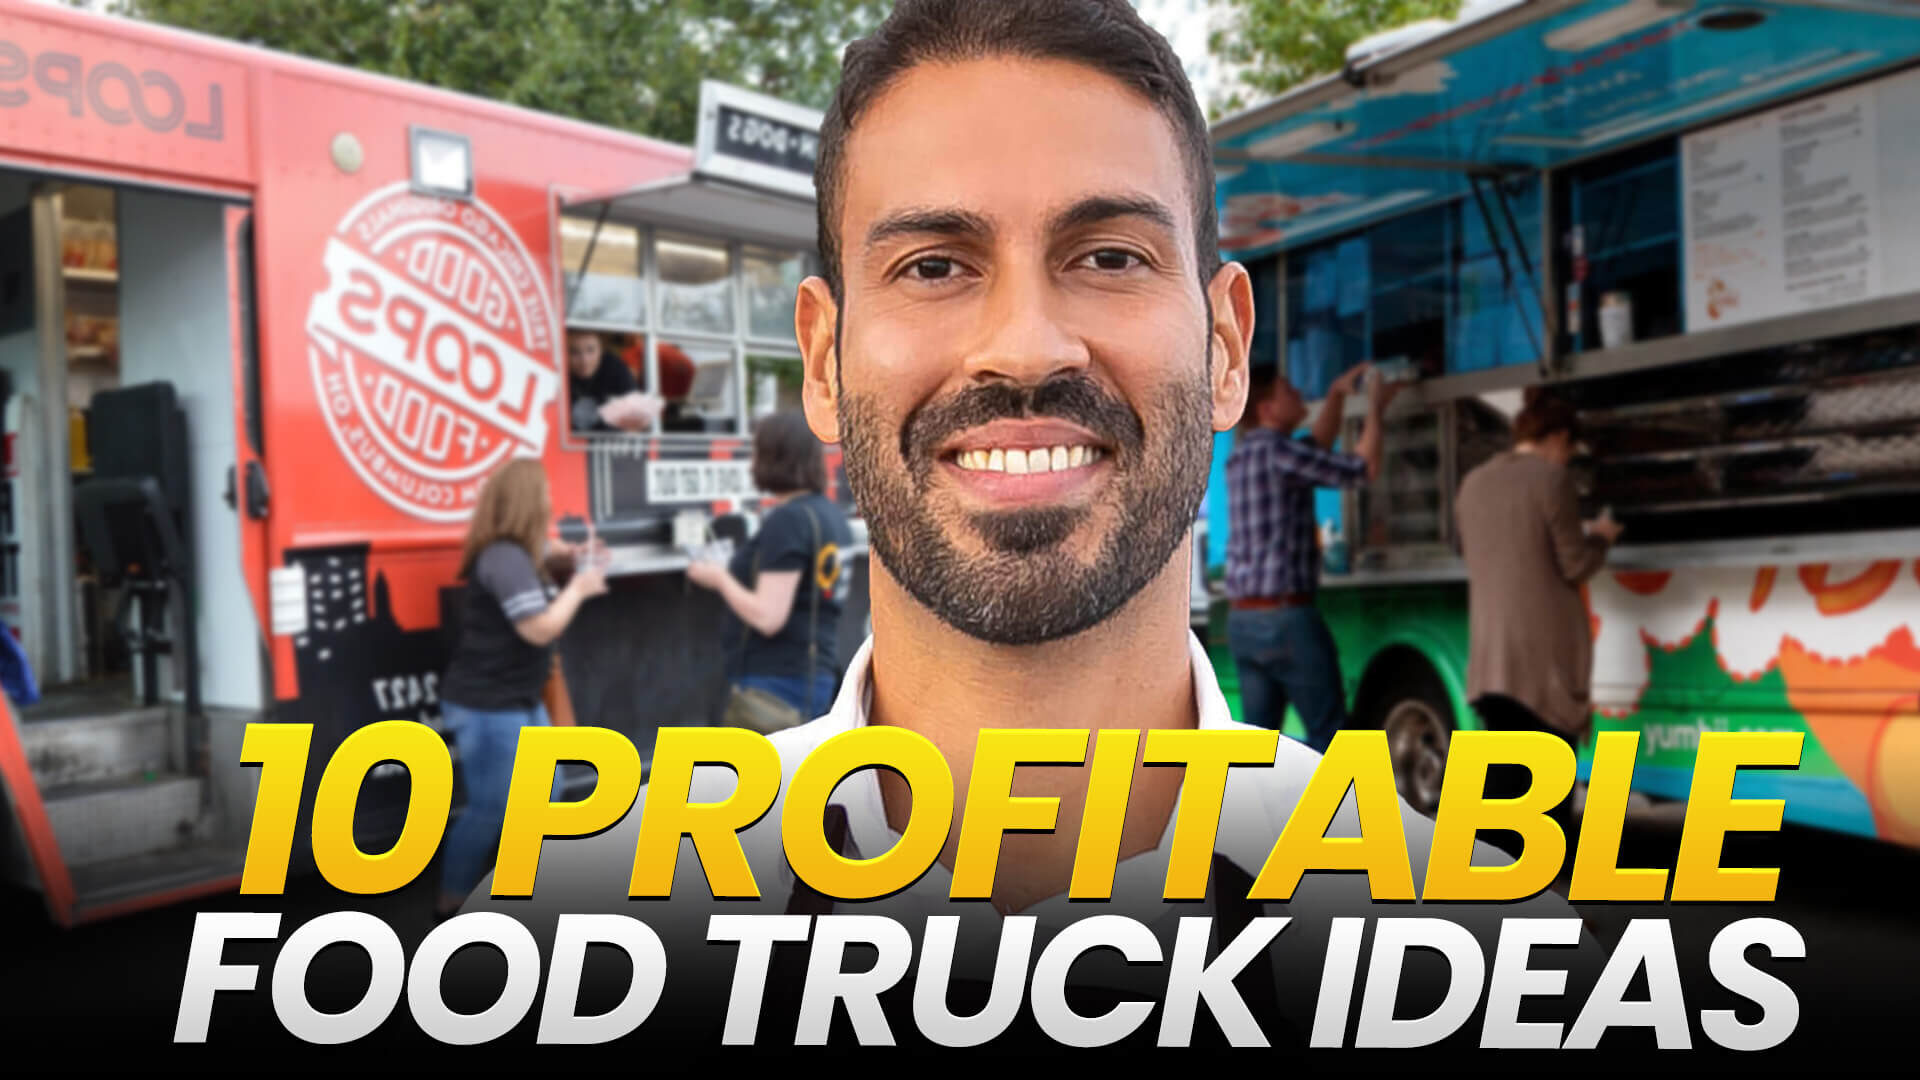 10 Profitable Food Truck Ideas with Low Startup Costs